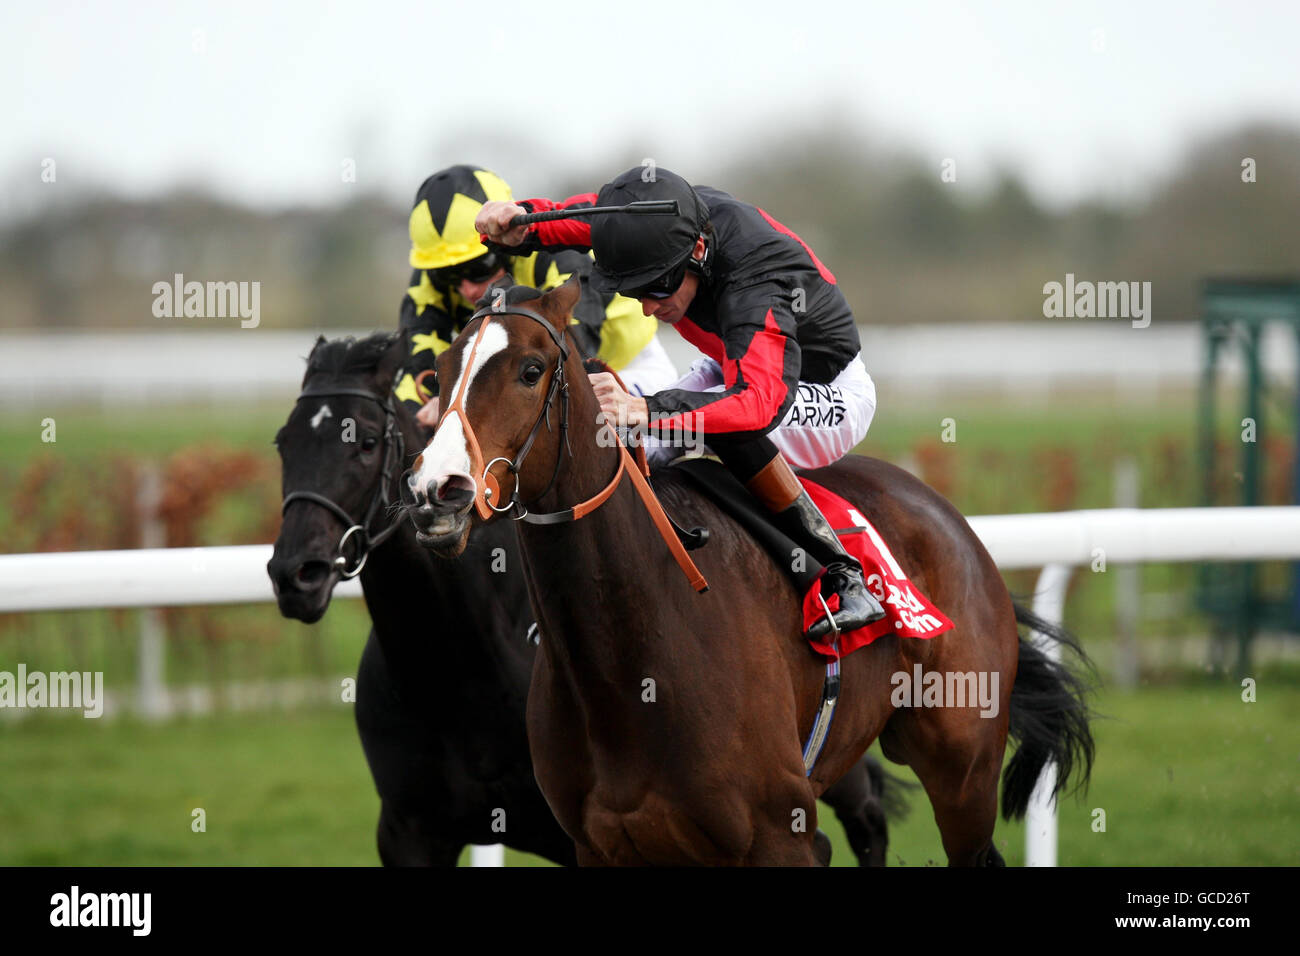 Shamwari Lodge ridden by Richard Hughes (right) wins the 32REd Casino Snowdrop Fillies' stakes during the Easter Saturday Race Day at Kempton Park Racecourse, Kempton. Stock Photo